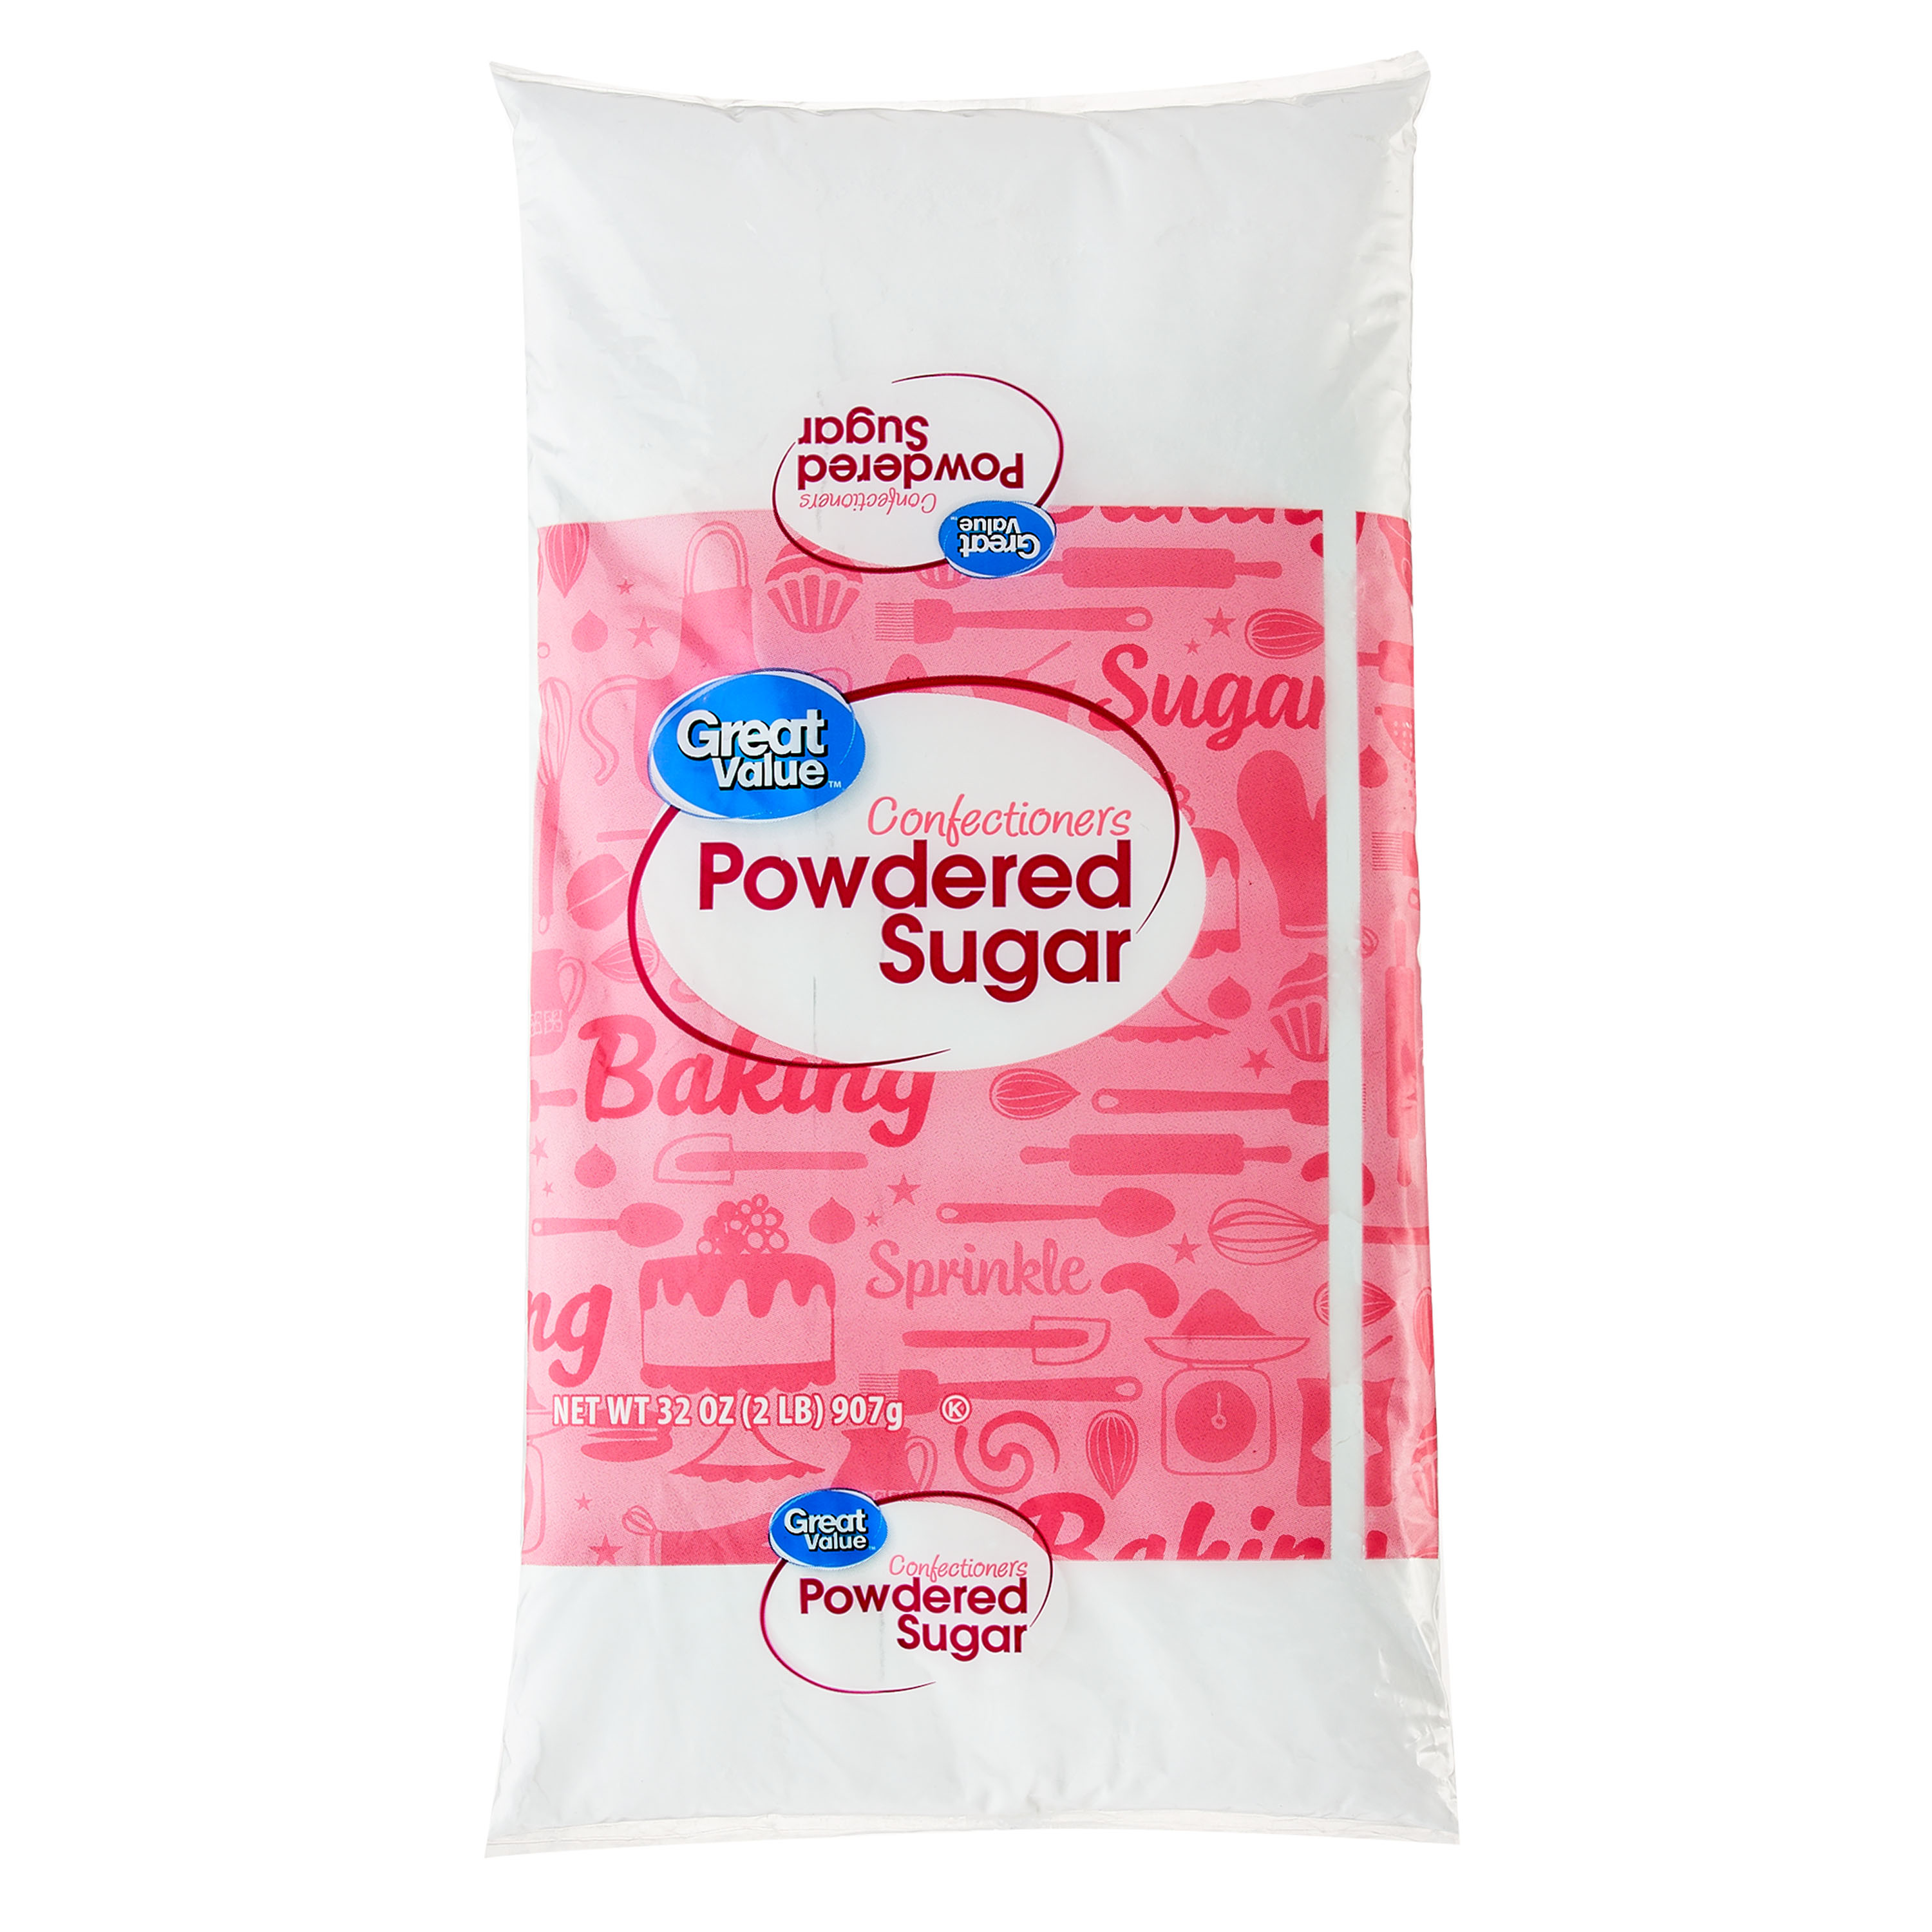 Great Value Confectioners Powdered Sugar, 32 oz - image 1 of 8